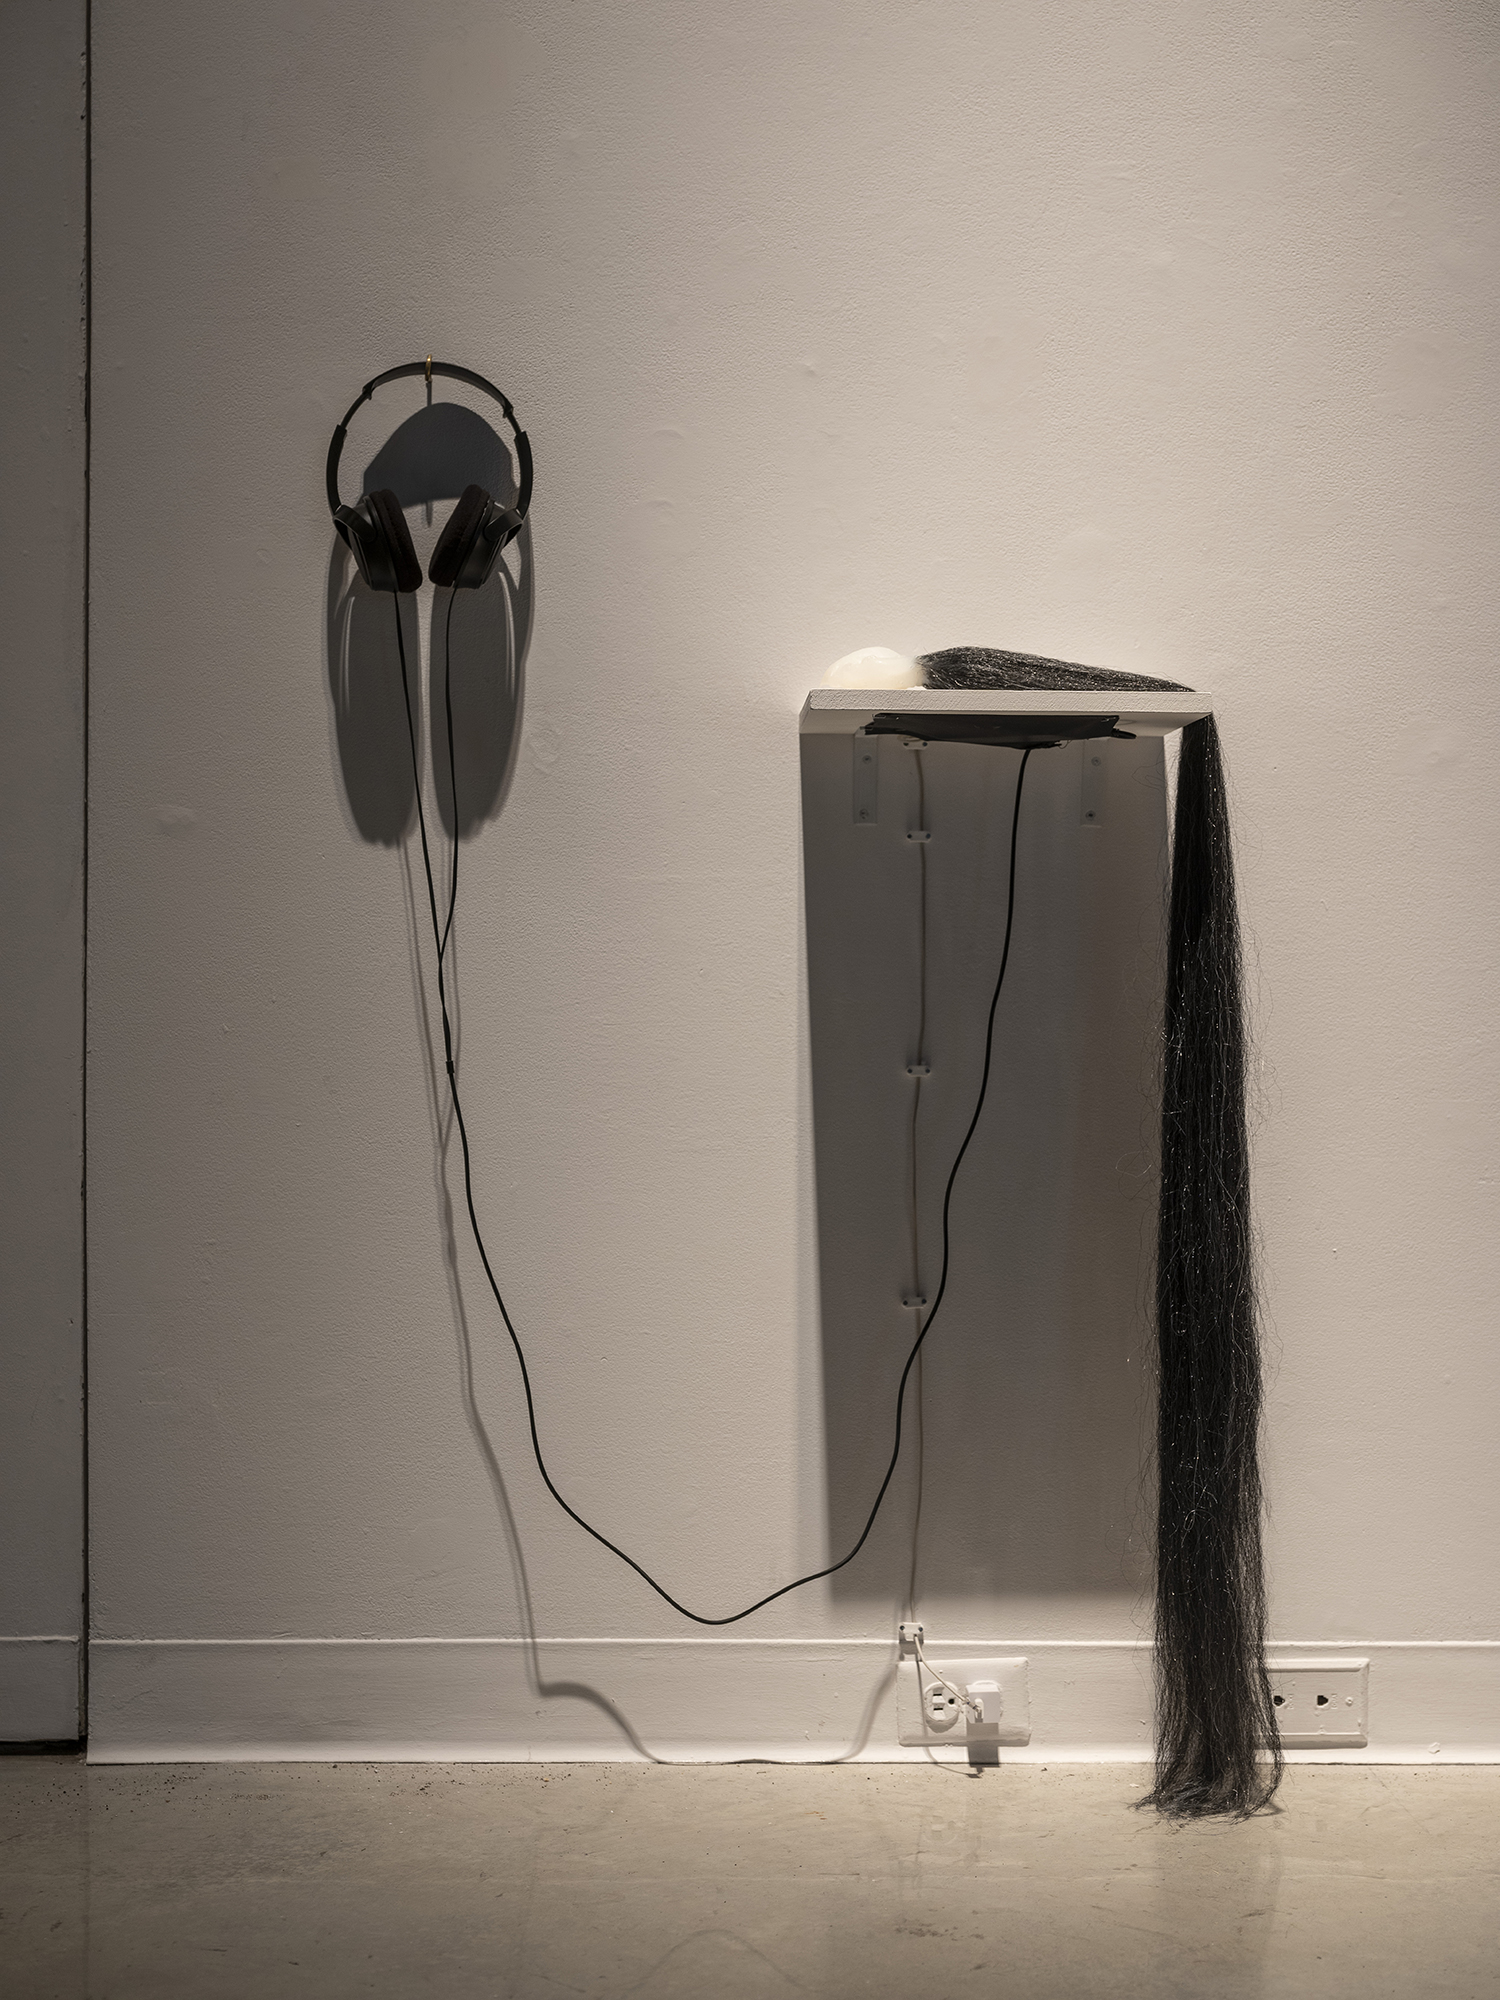   Plug,  2018 Silicone, synthetic hair, audio   and where is the body?,  2018 ArtLab, Western University. London, ON Photo: Mark Kasumovic 